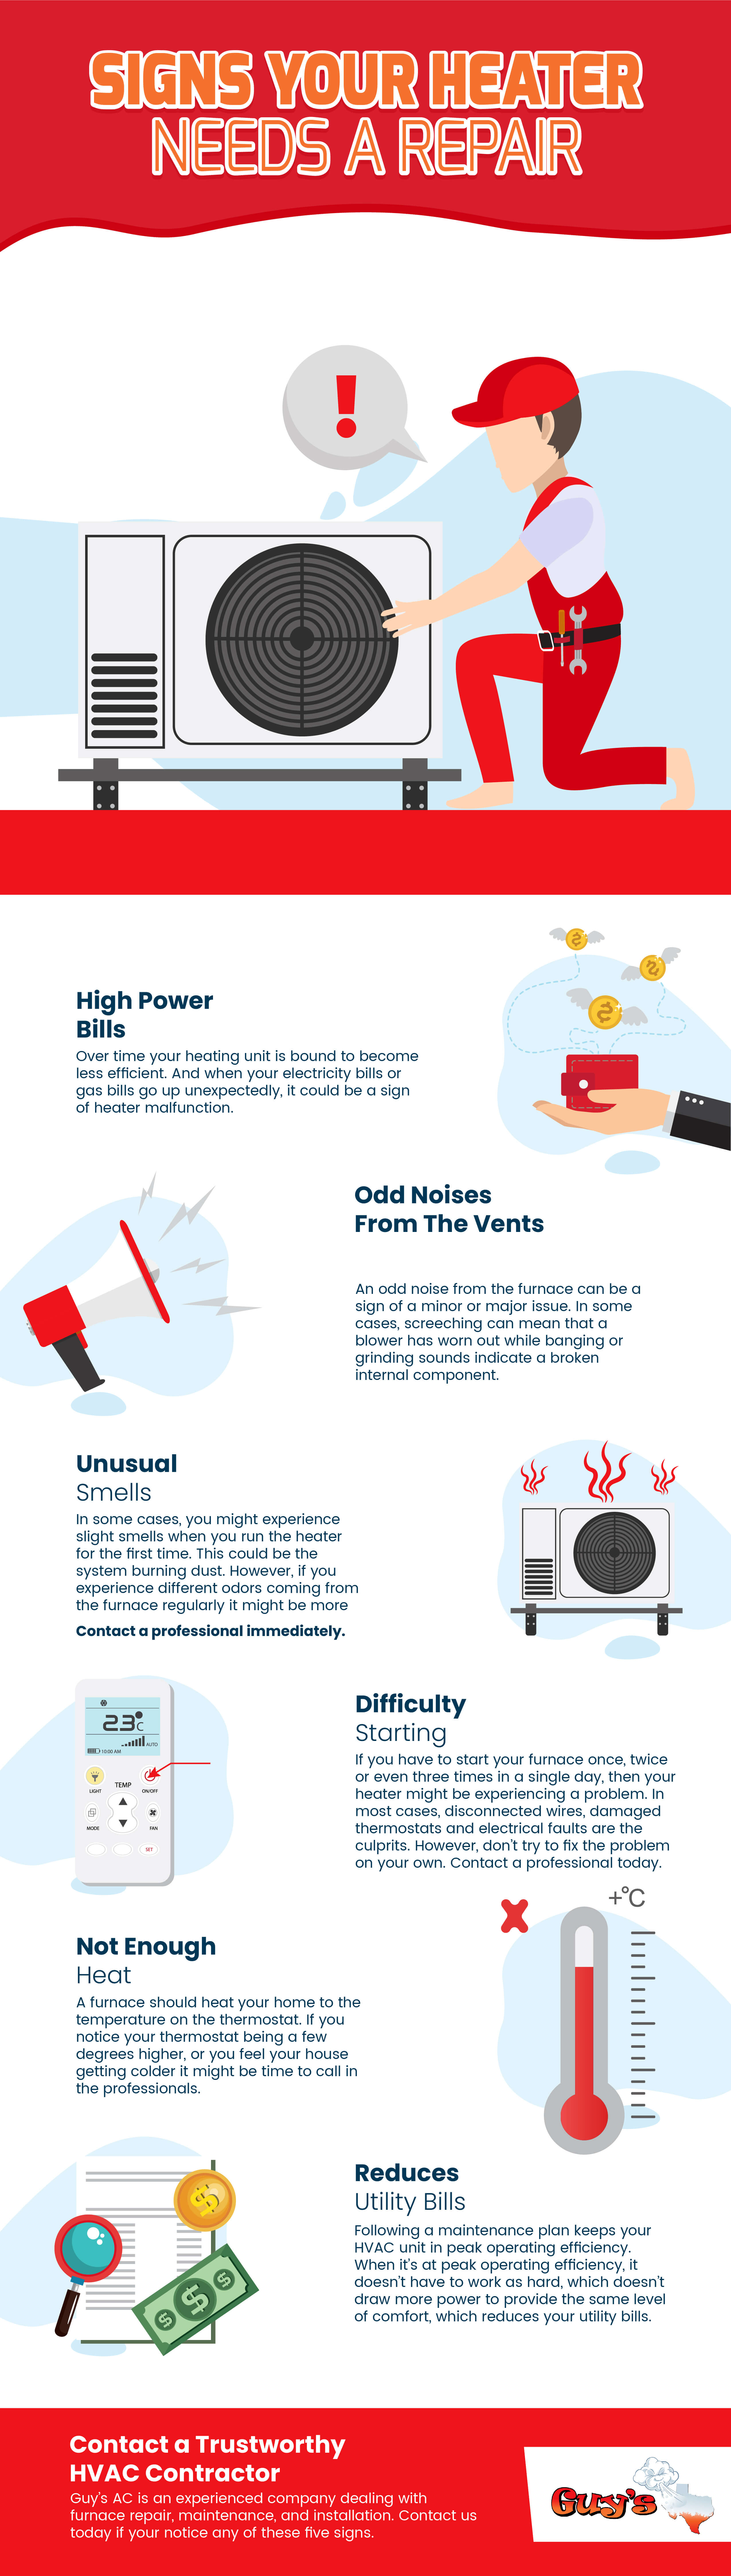 Signs Your Heater Needs a Repair